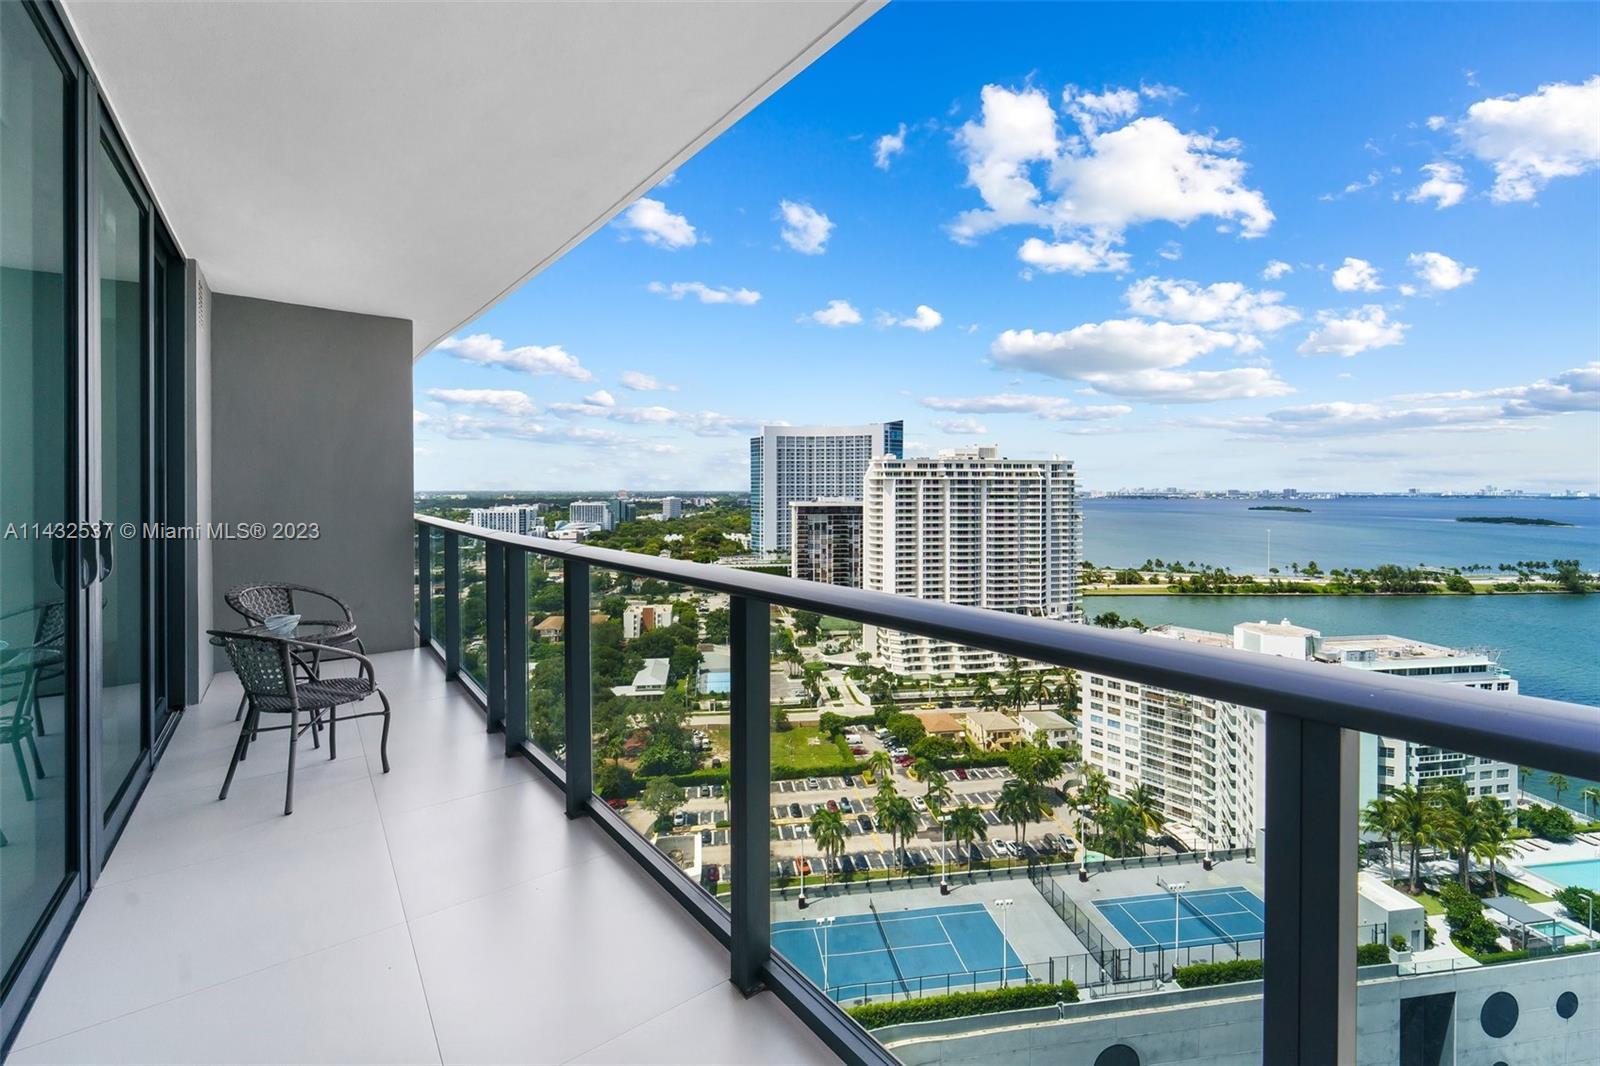 Gorgeous 1 bed/1.5 baths unit, with nice bay and skyline views. Tile floors throughout, Italian cabi